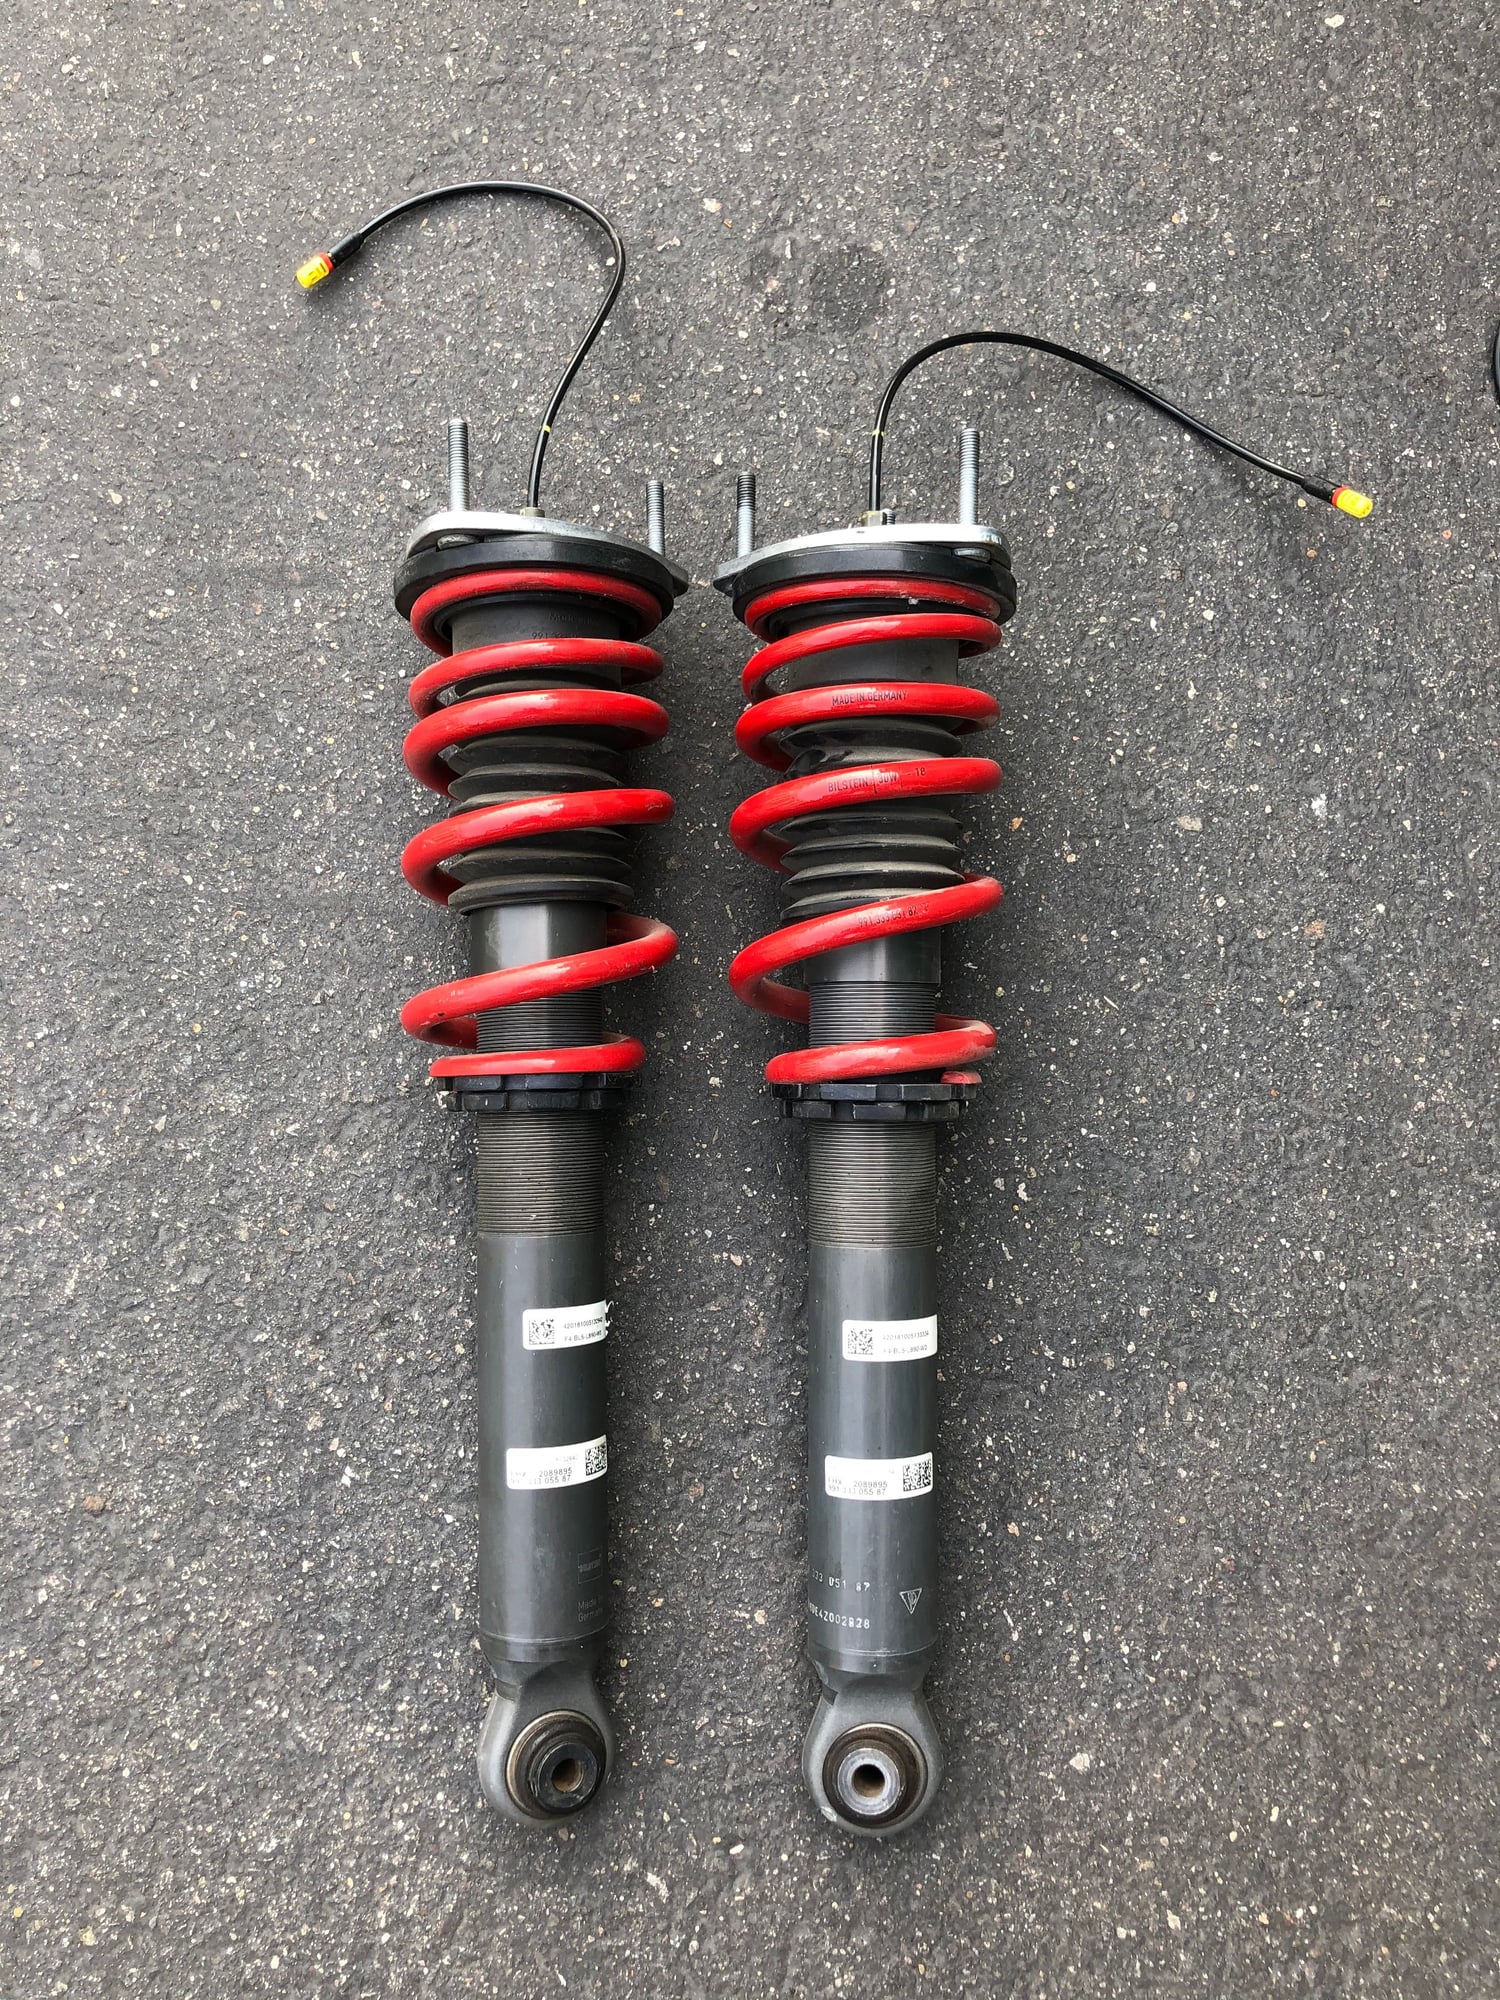 2018 Porsche GT3 - 2 rear coil-overs with stock springs - Accessories - $1,000 - Irvine, CA 92620, United States